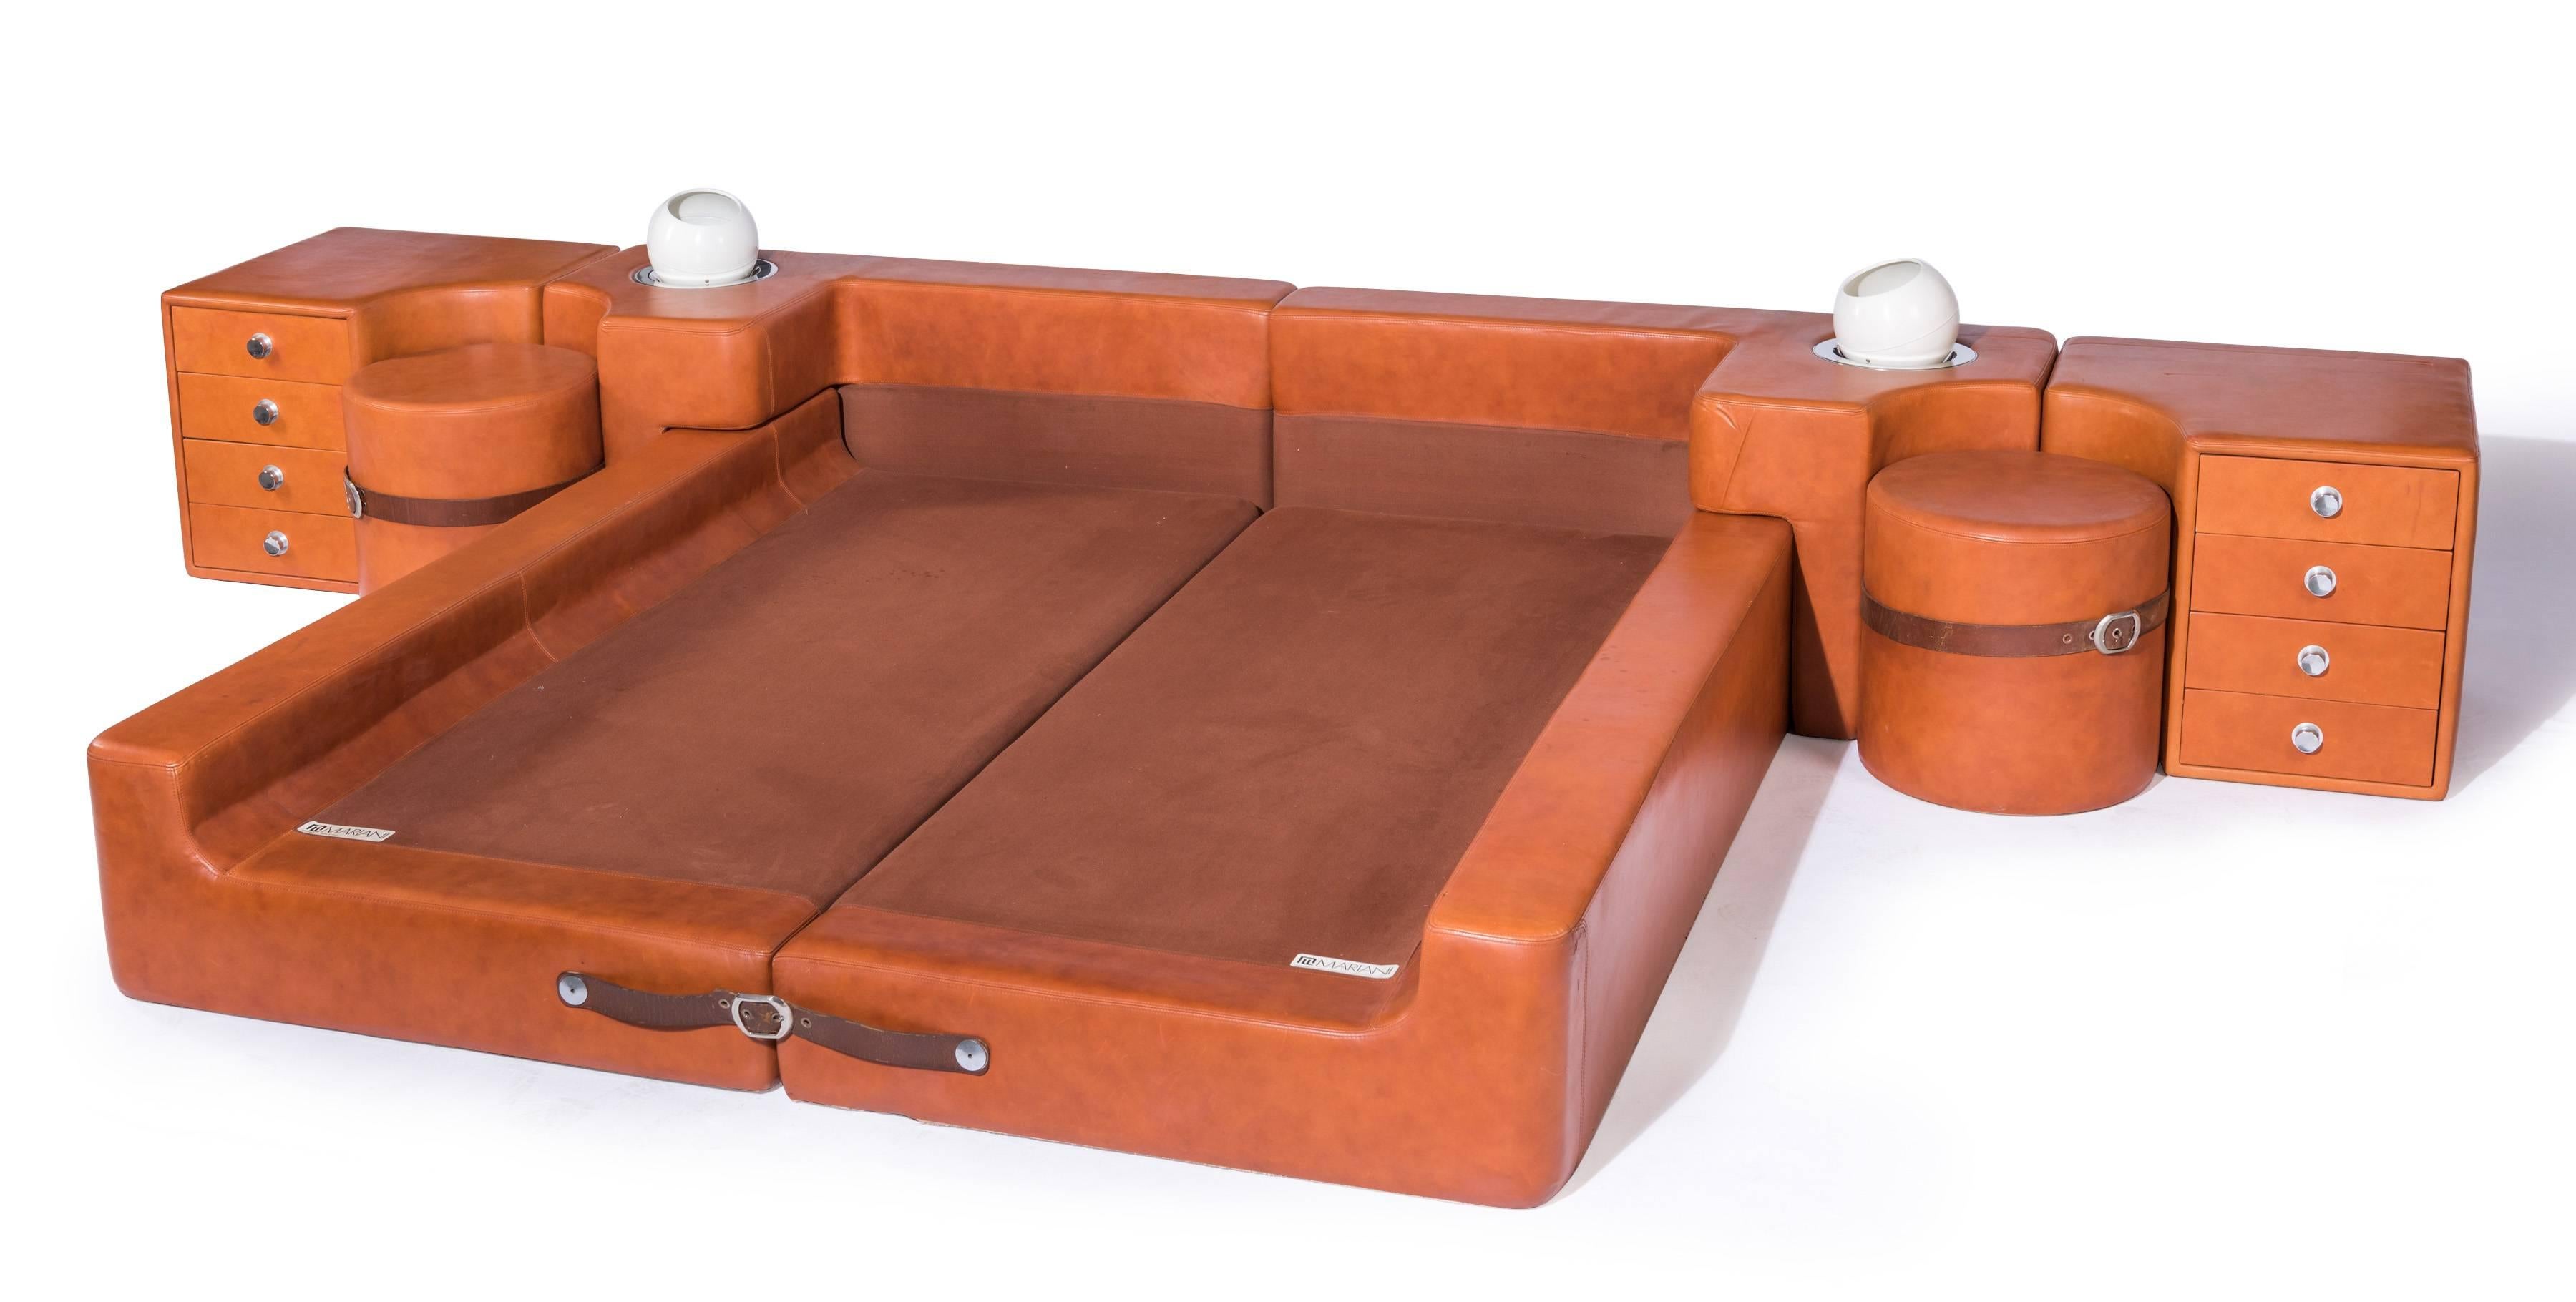 Cognac leather bedroom suite by Guido Faleschini for Mariani of Italy, circa 1975. This Italian bed includes bed frame with headboard, two nightstands and two built-in lamps. The frame is held together by a leather belt. Similarly, the two circular